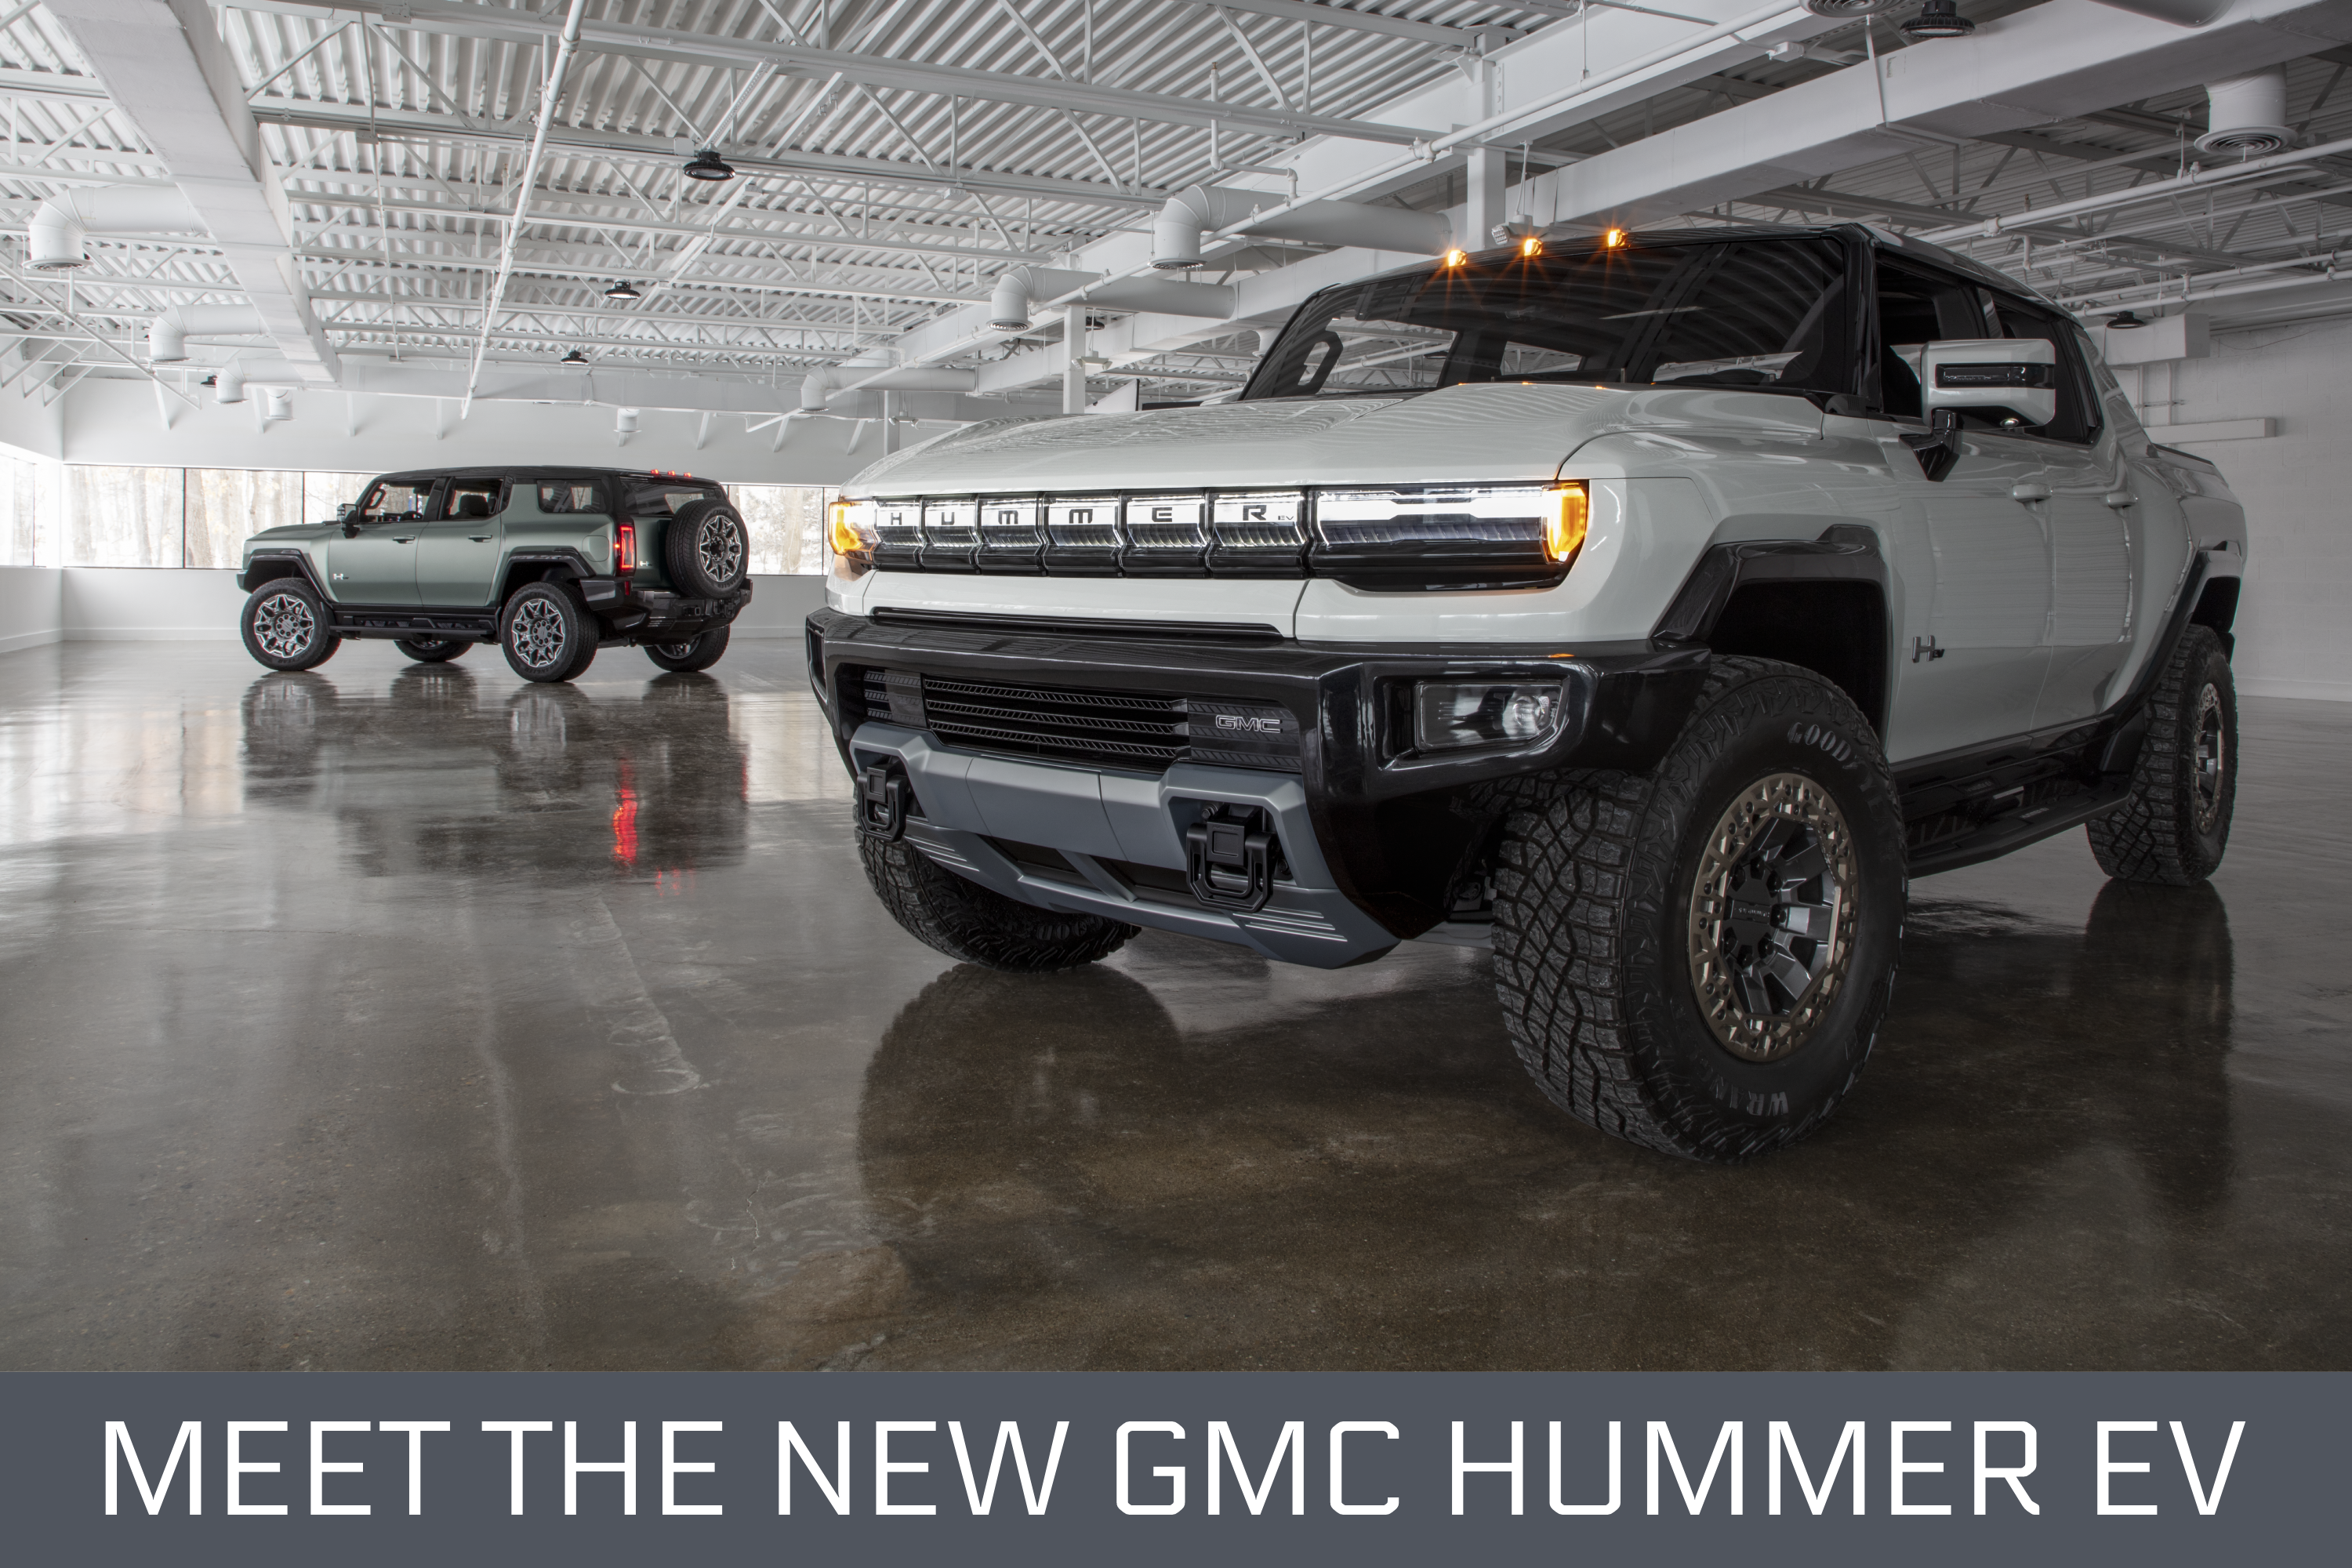 New Hummer EV truck and SUV in garage with words “Meet the New GMC Hummer EV” below